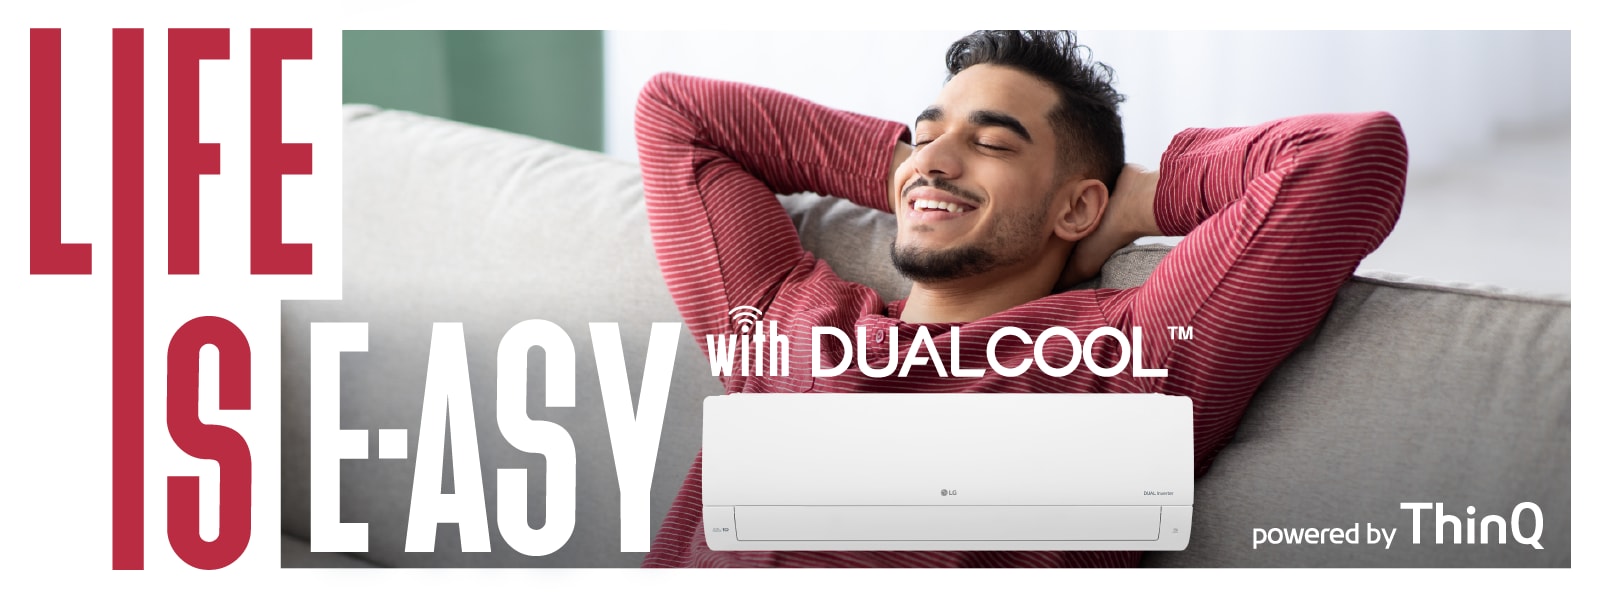 life is easy with DualCool